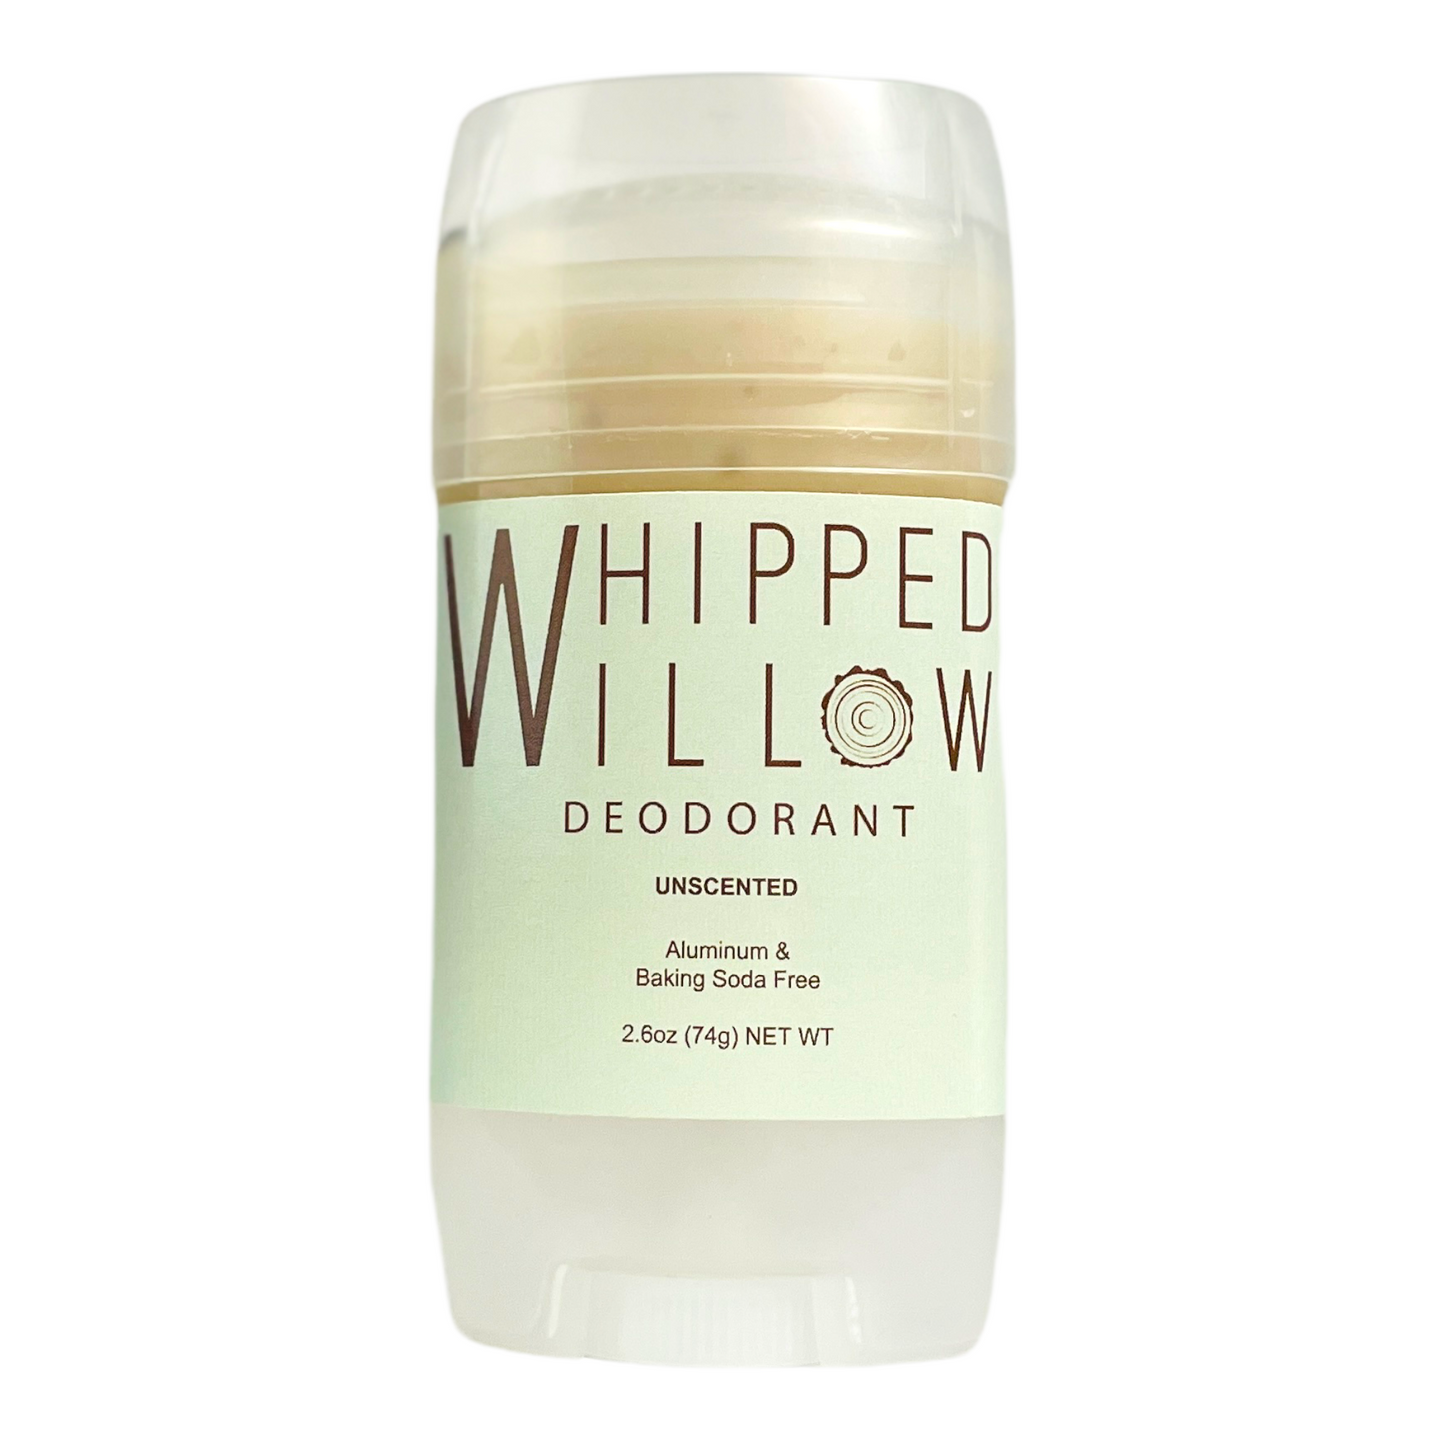 Whipped Willow baking soda free unscented deodorant